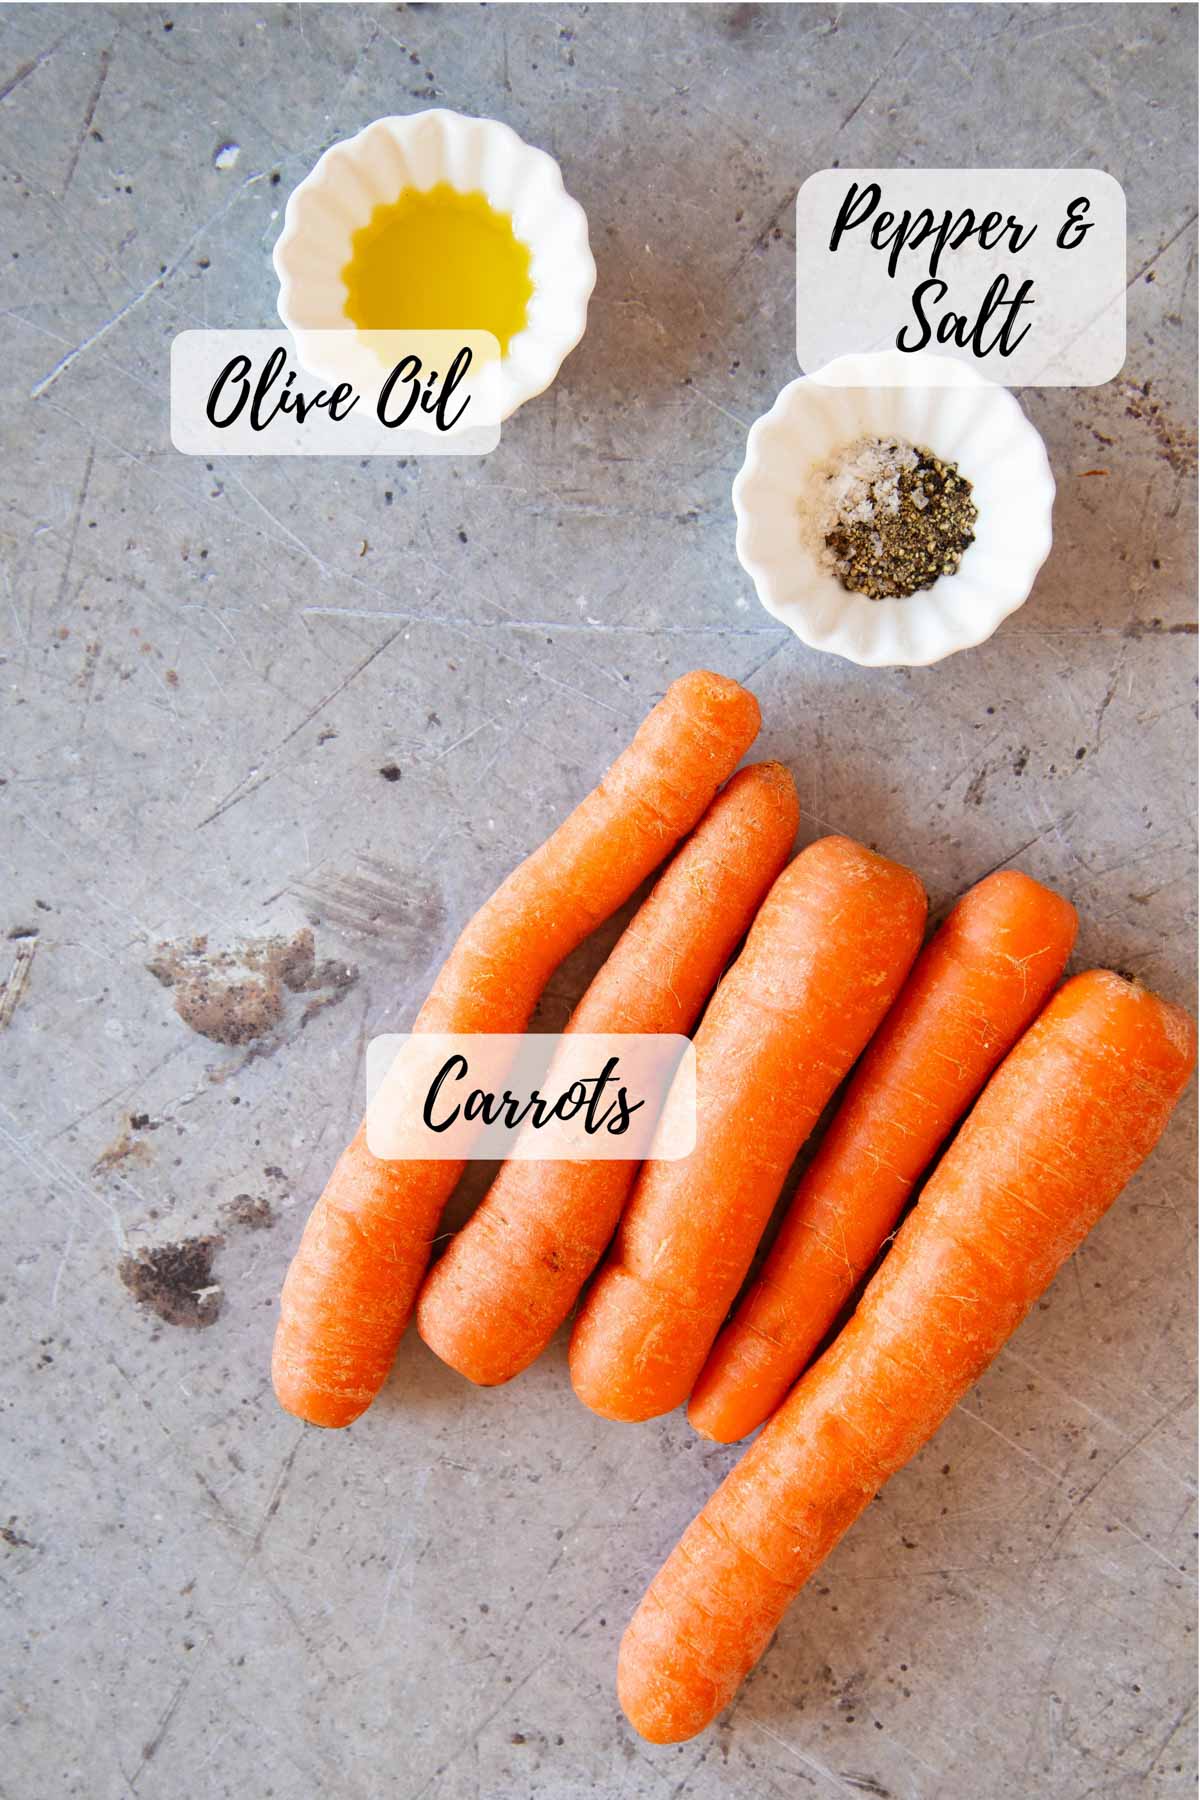 All you need is carrots, oilve oil and seasoning!